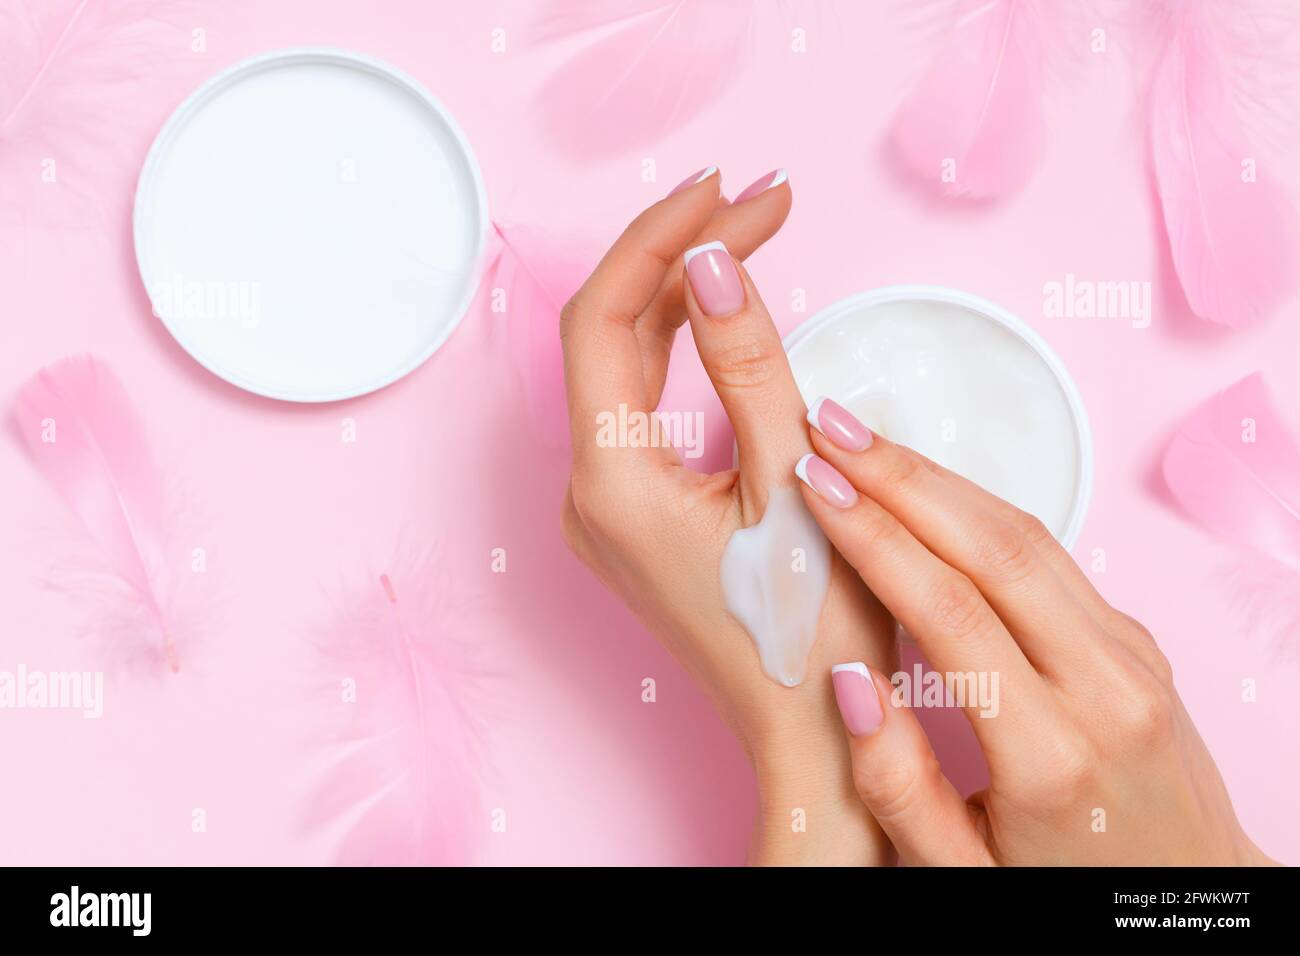 Top view of well-groomed female hands with moisturizing skin care cream in an open jar on a pink background with feathers. Copy space, close up, flat Stock Photo